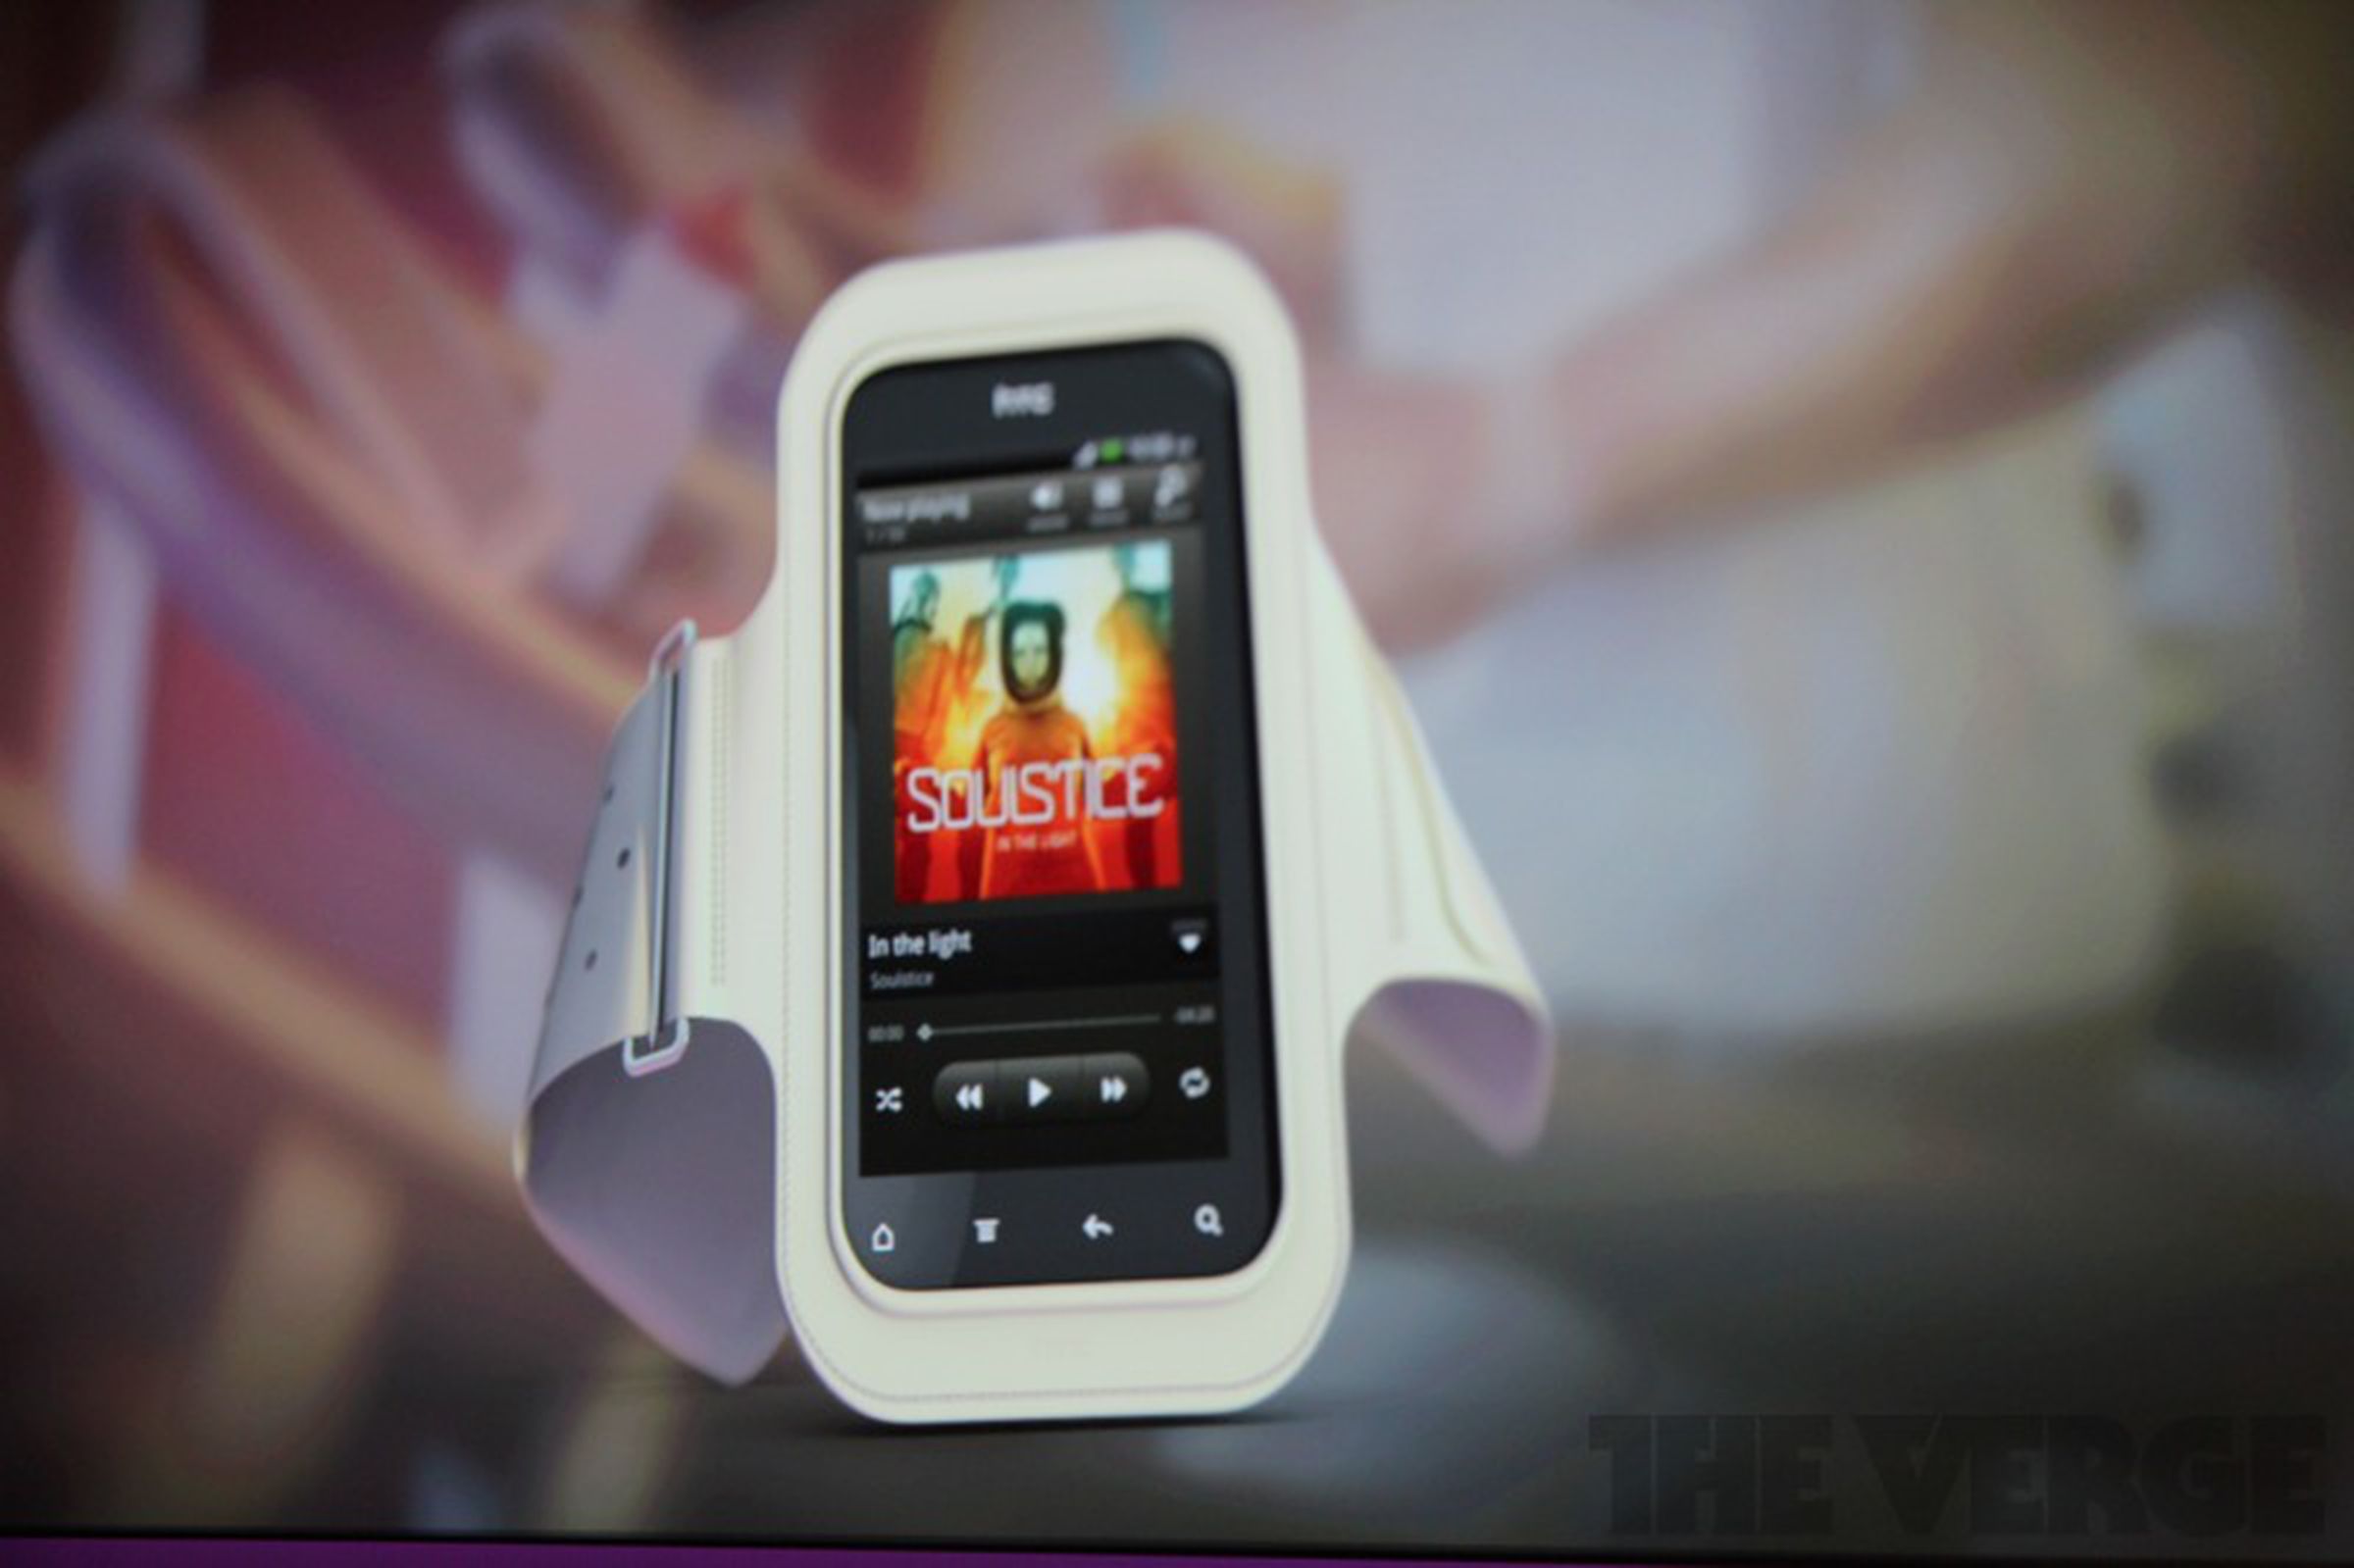 HTC Rhyme announcement photo gallery